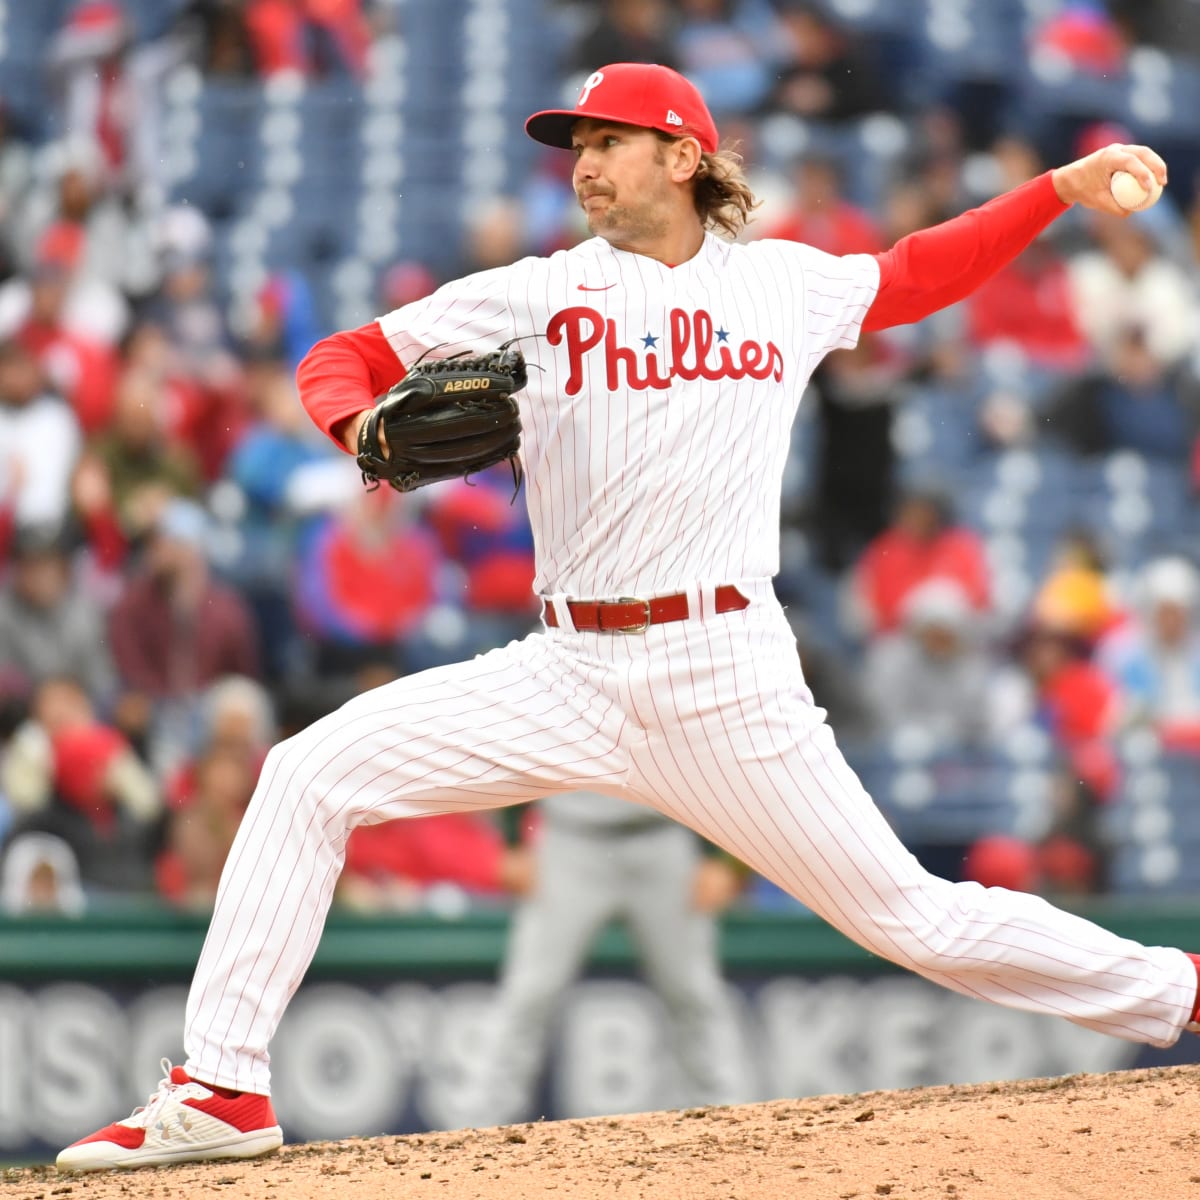 Connor Brogdon - MLB Relief pitcher - News, Stats, Bio and more